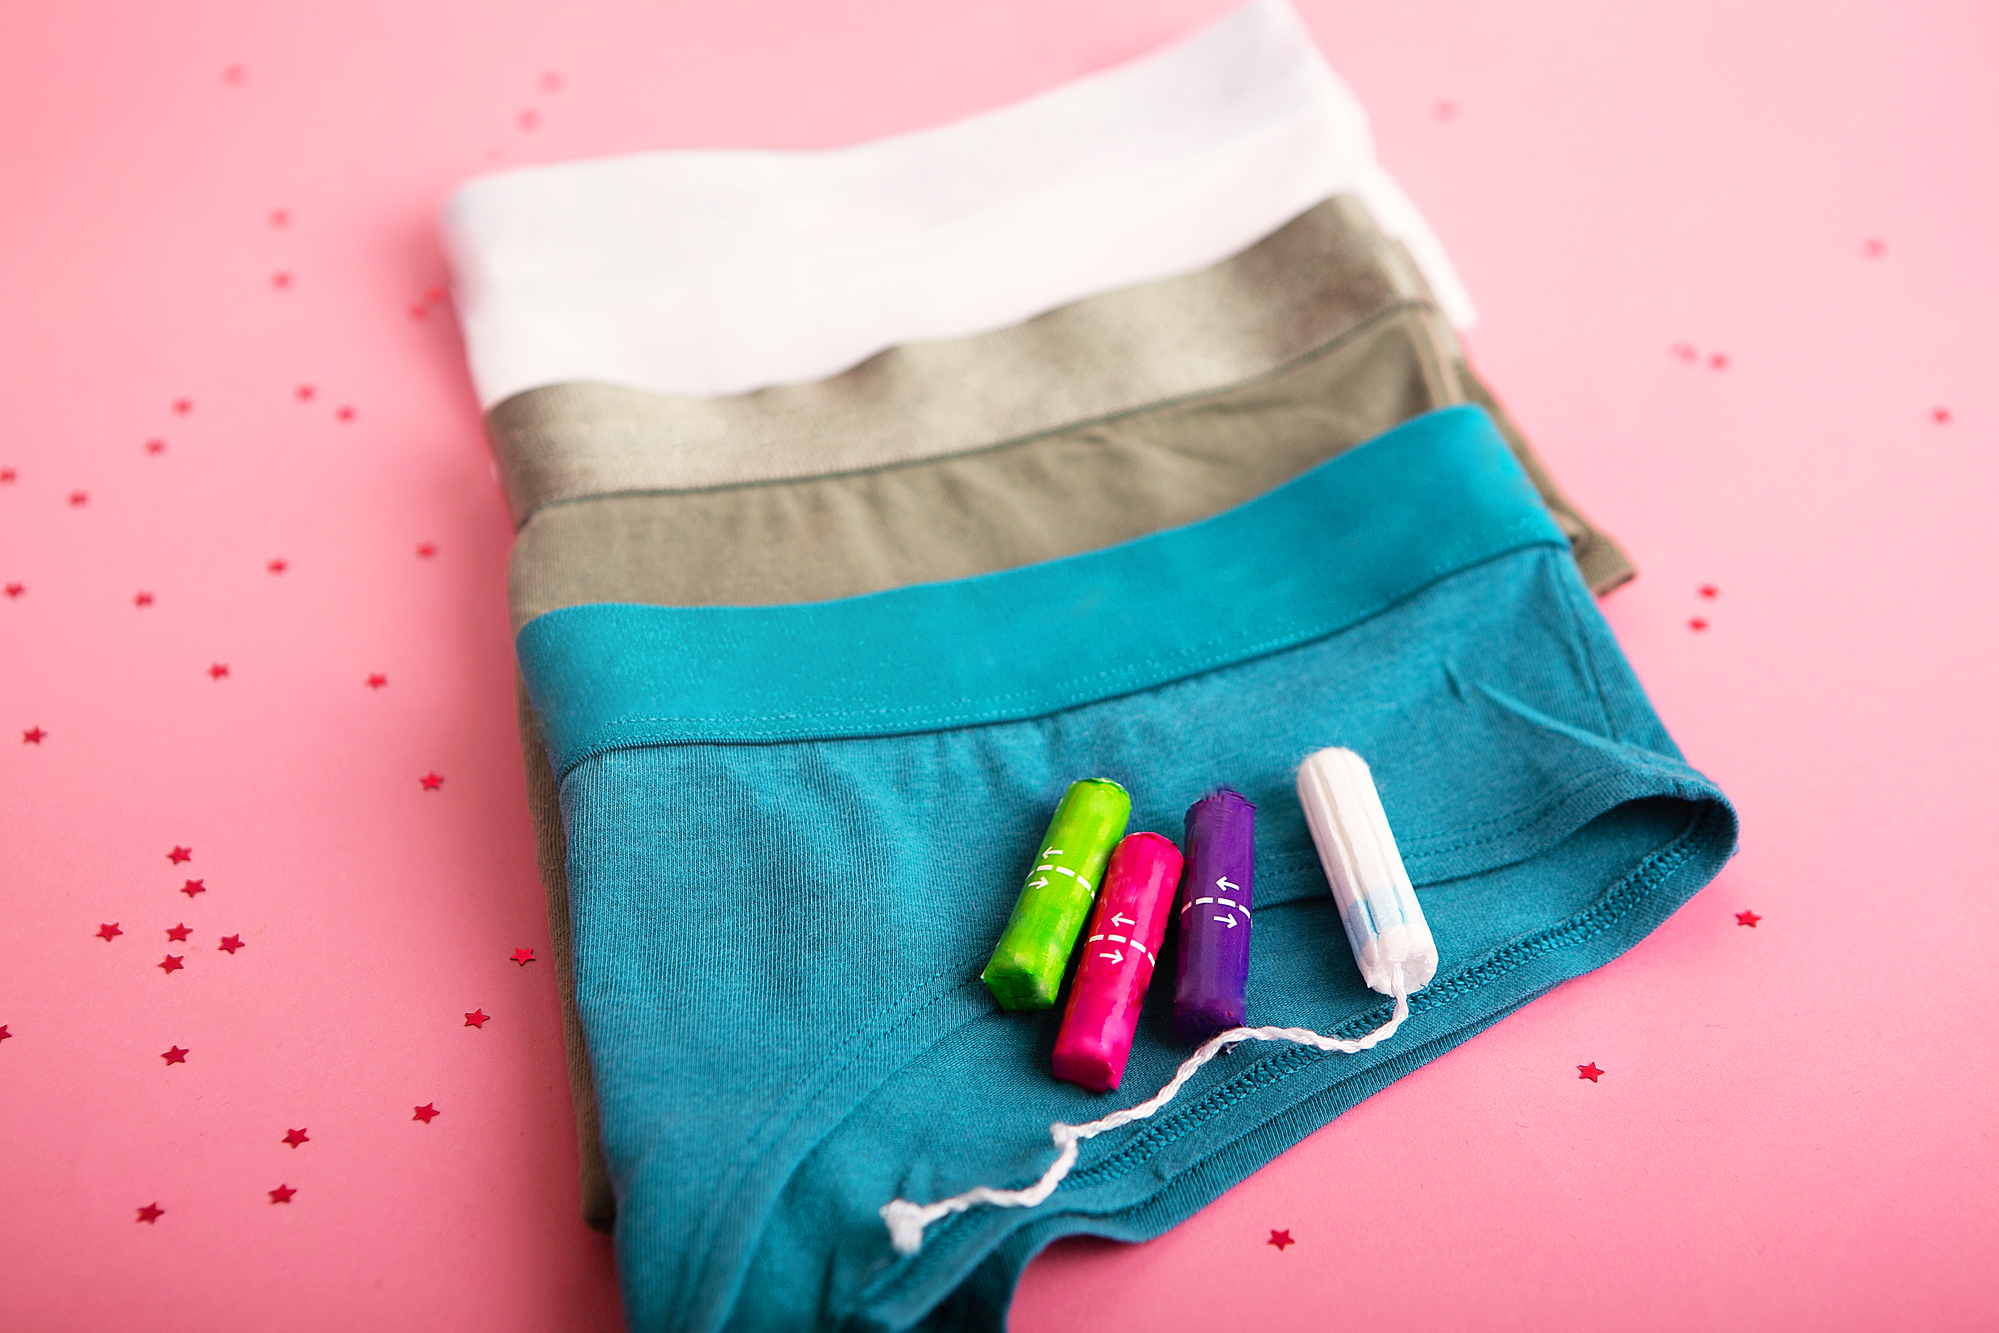 Naarica's Period Underwear: Rash-Free, Care-Free Periods with